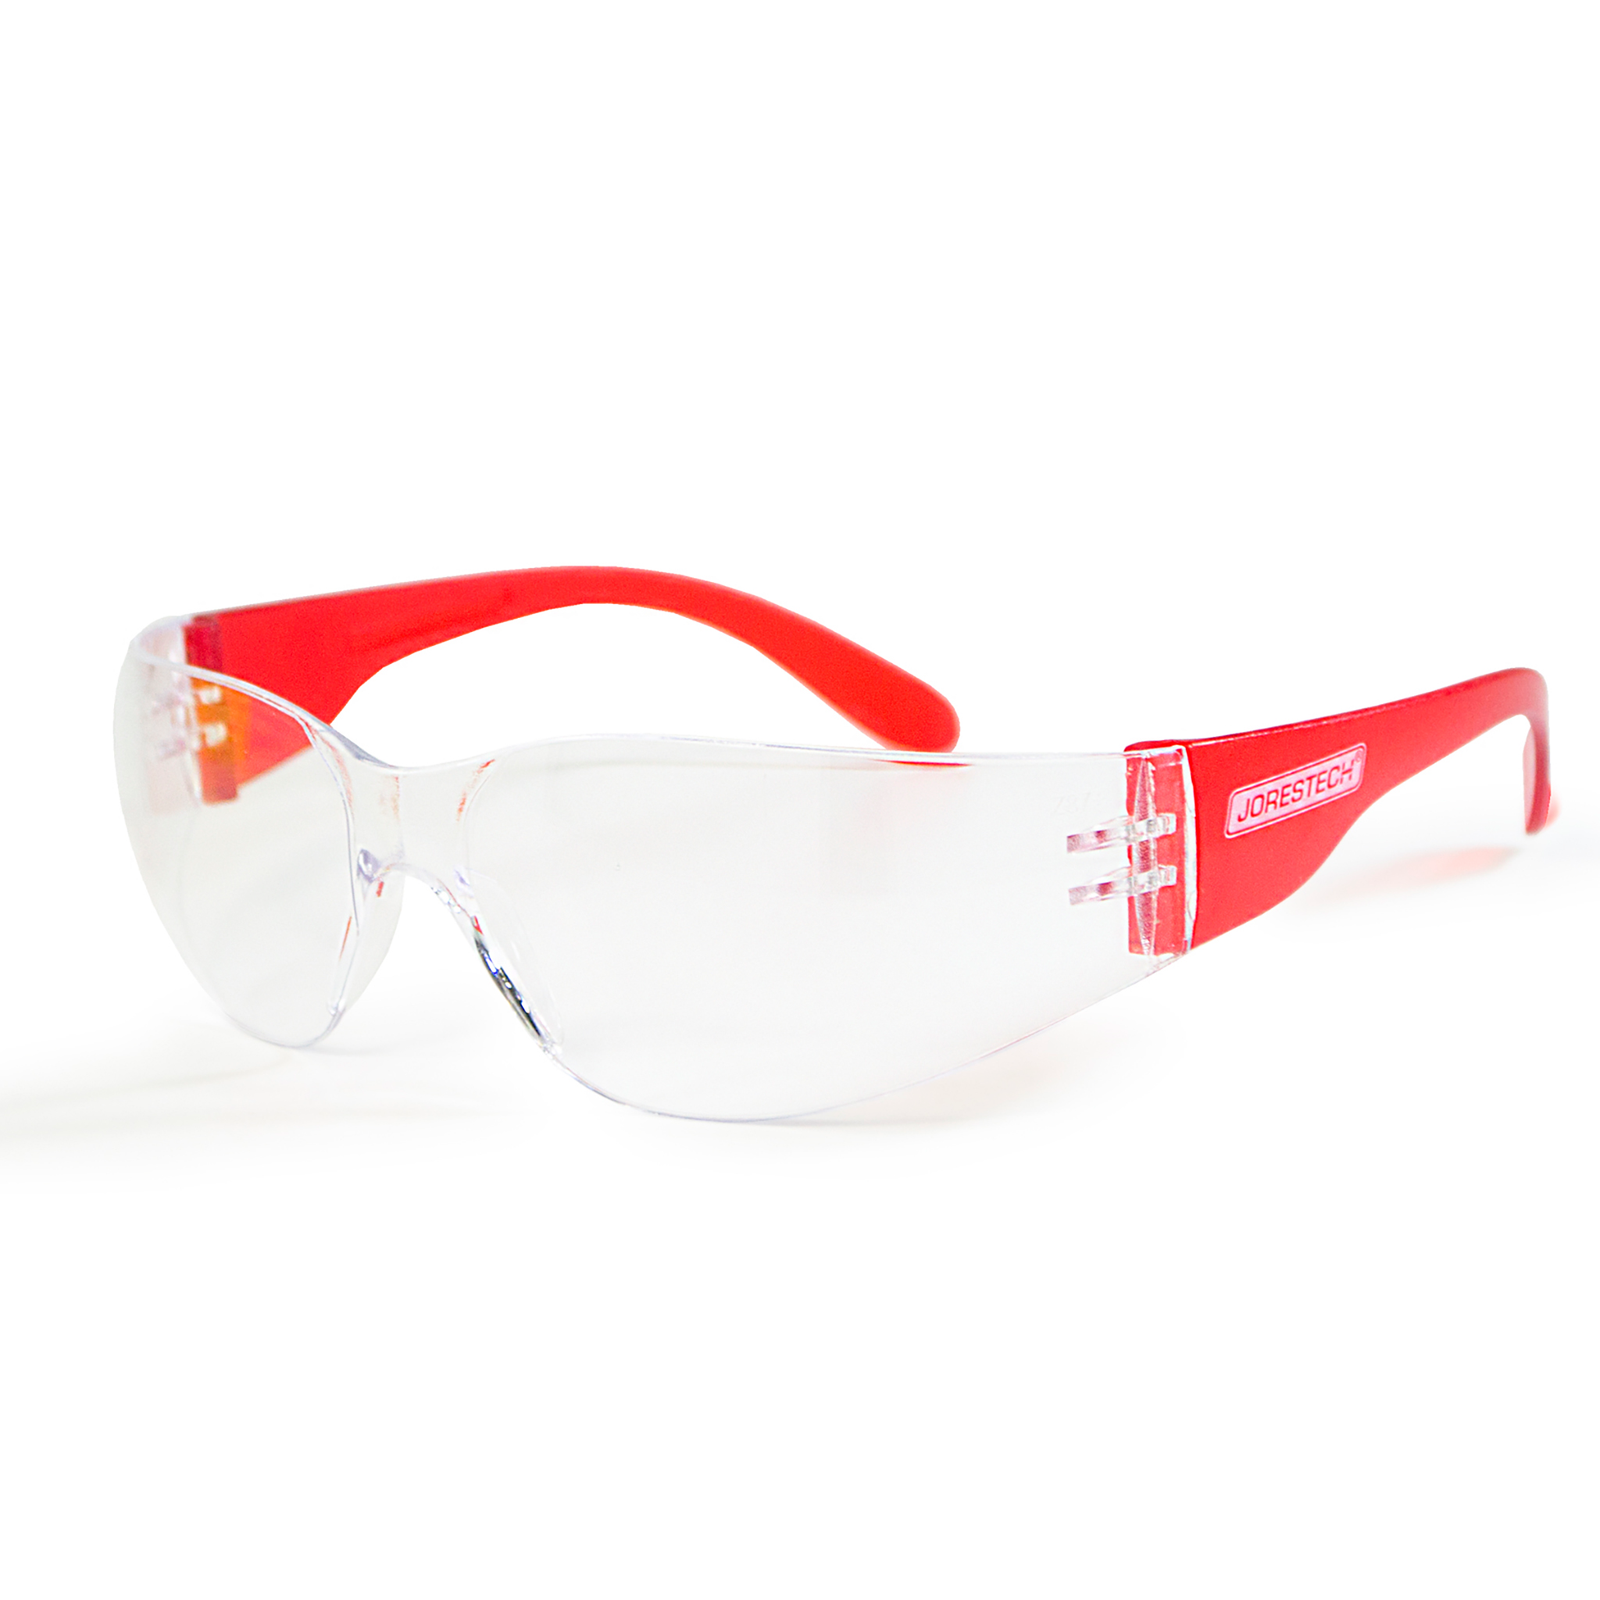 Features one JORESTECH high impact glass with clear lenses and red temples over white background